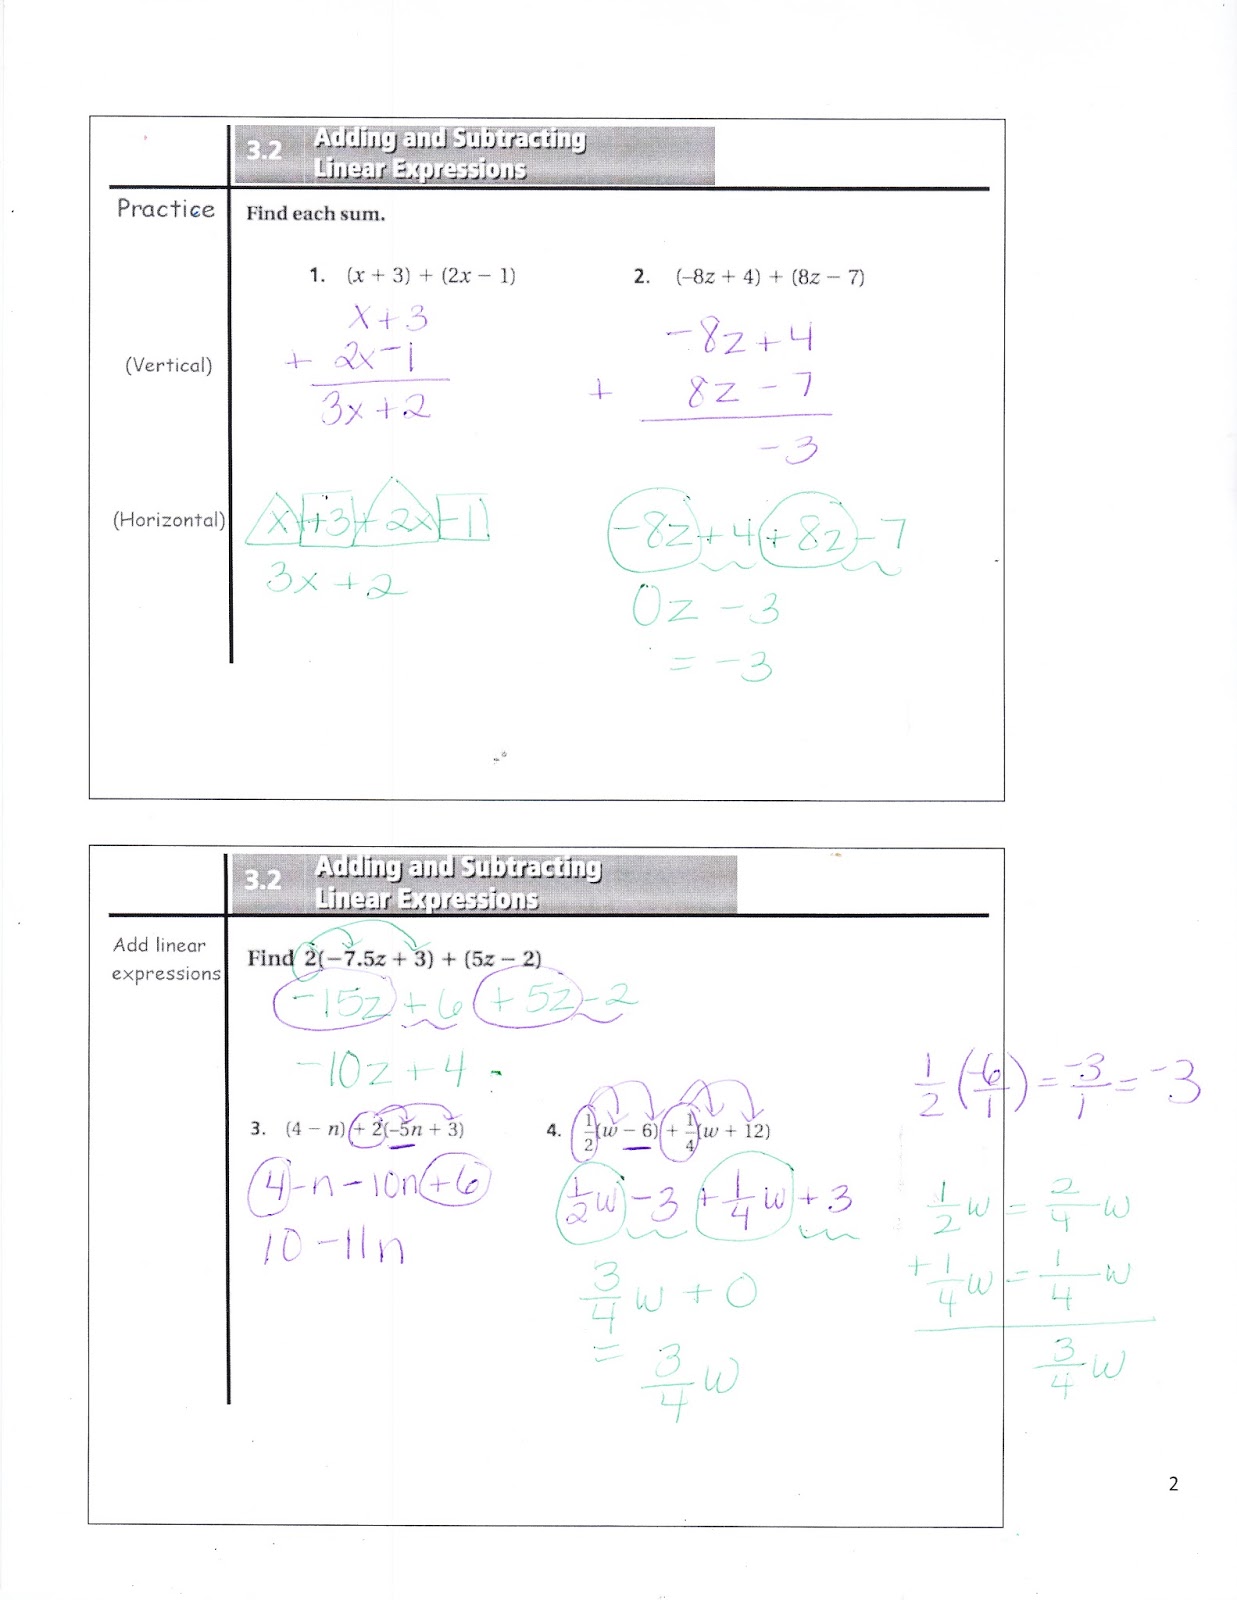 Ms. Jean's Classroom Blog: 3.2 Adding and Subtracting Linear Expressions